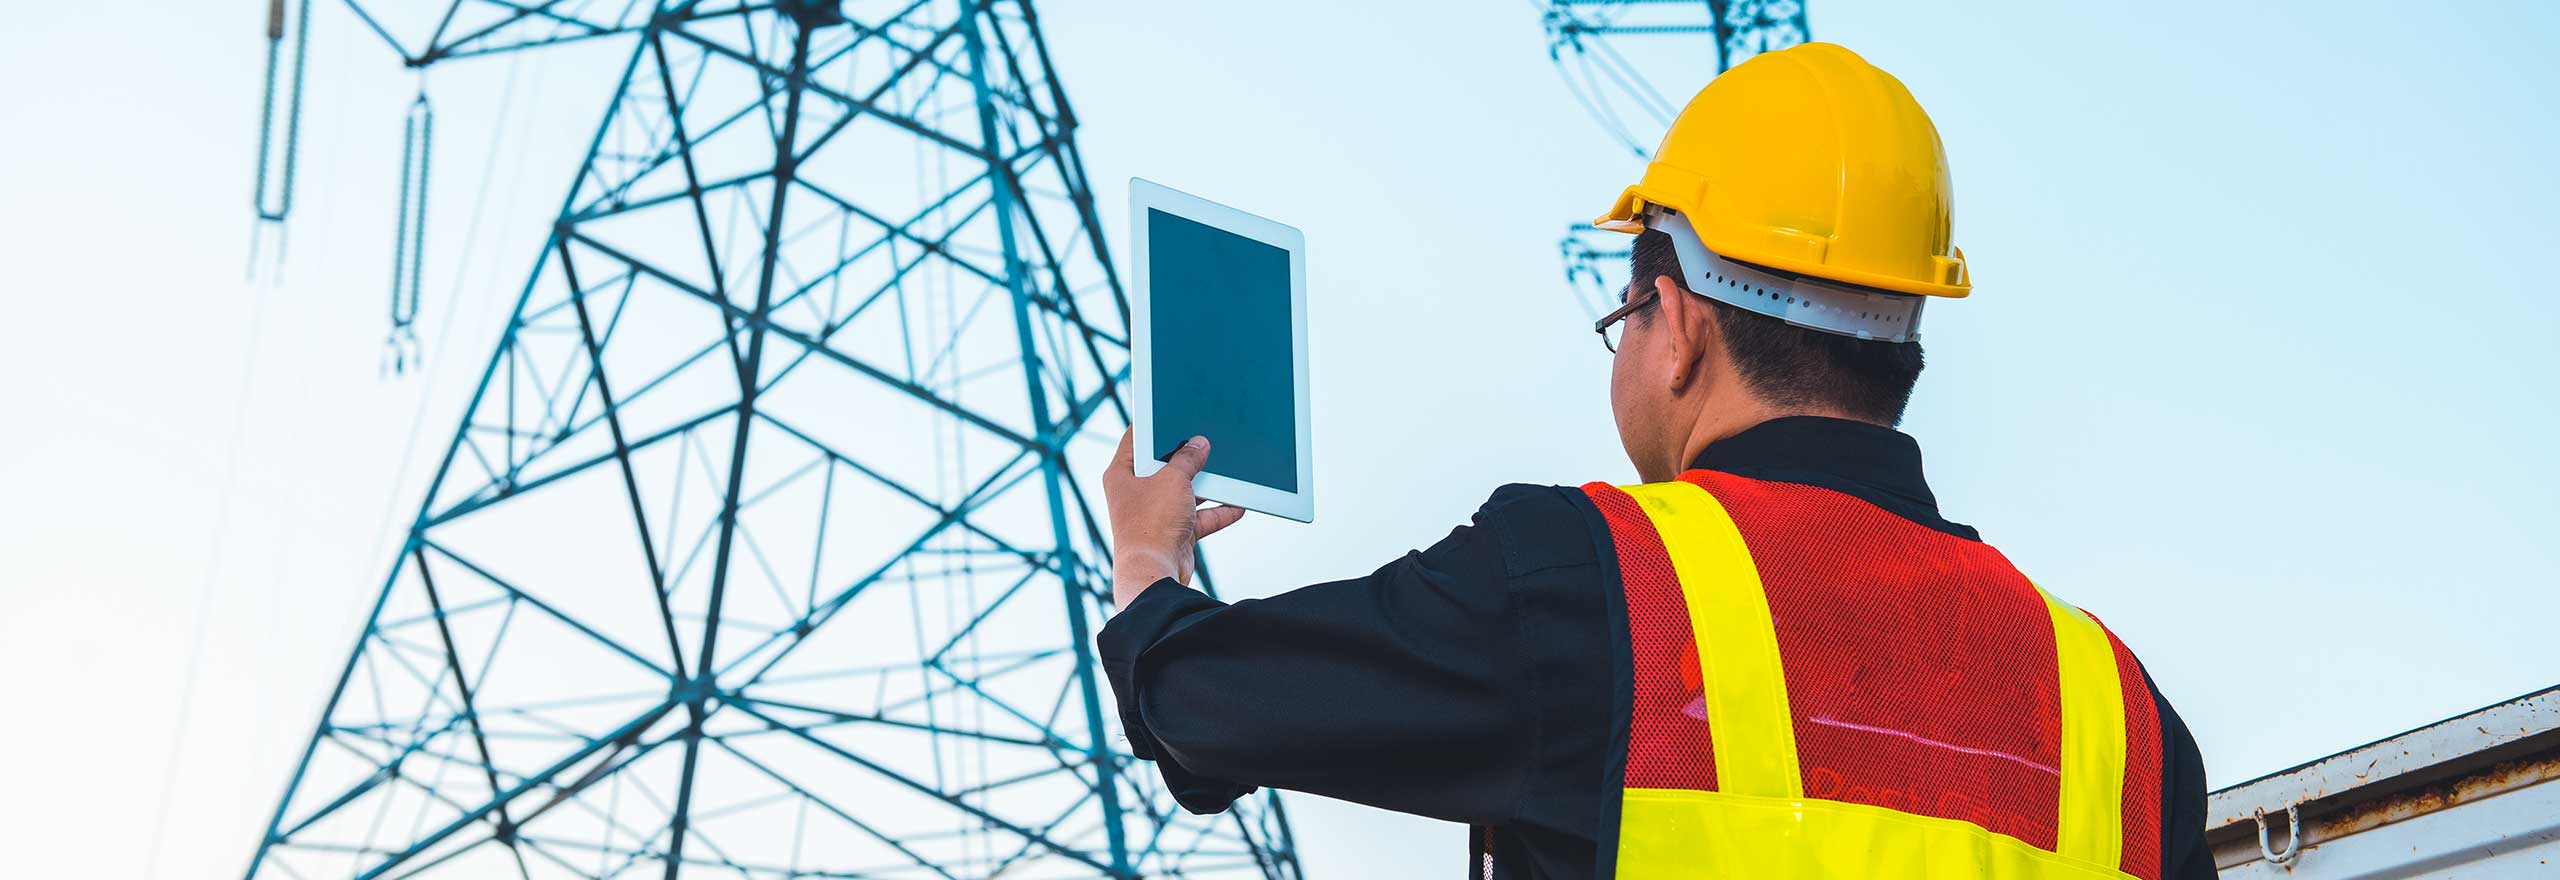 Electrical engineer in hardhat holding tablet at high-voltage power pylon.